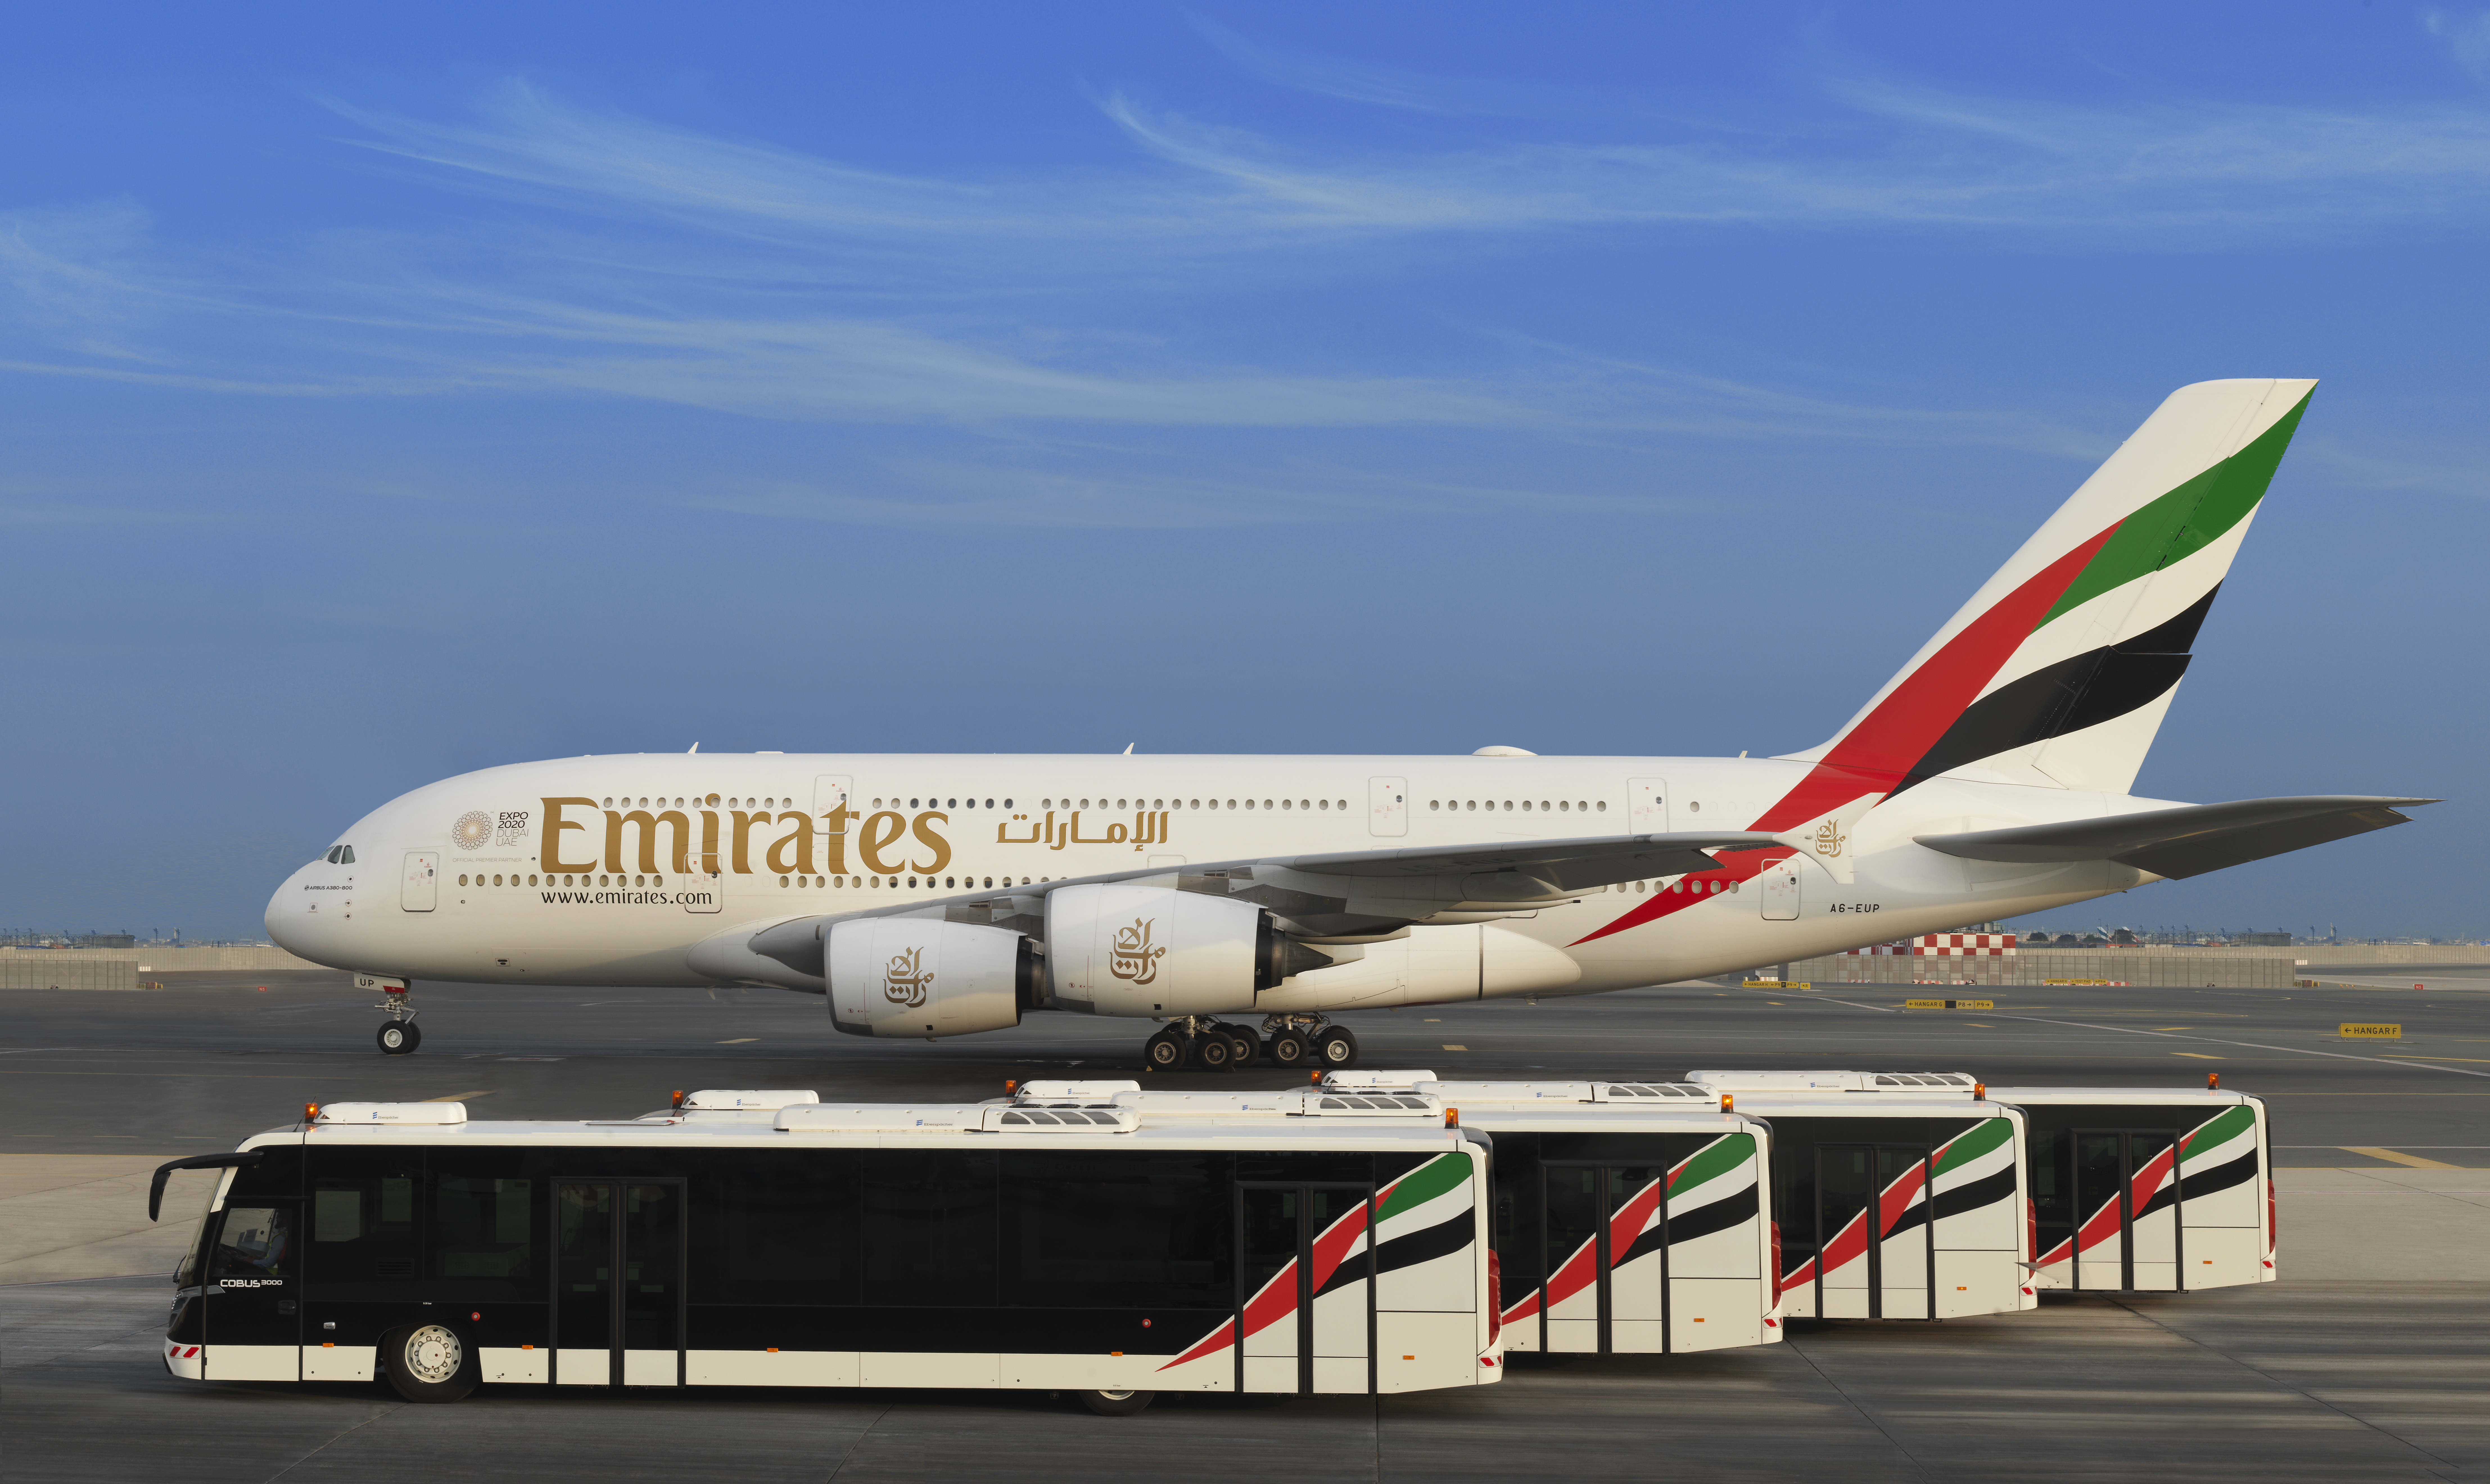 Emirates introducing new high tech airside buses for economy passengers